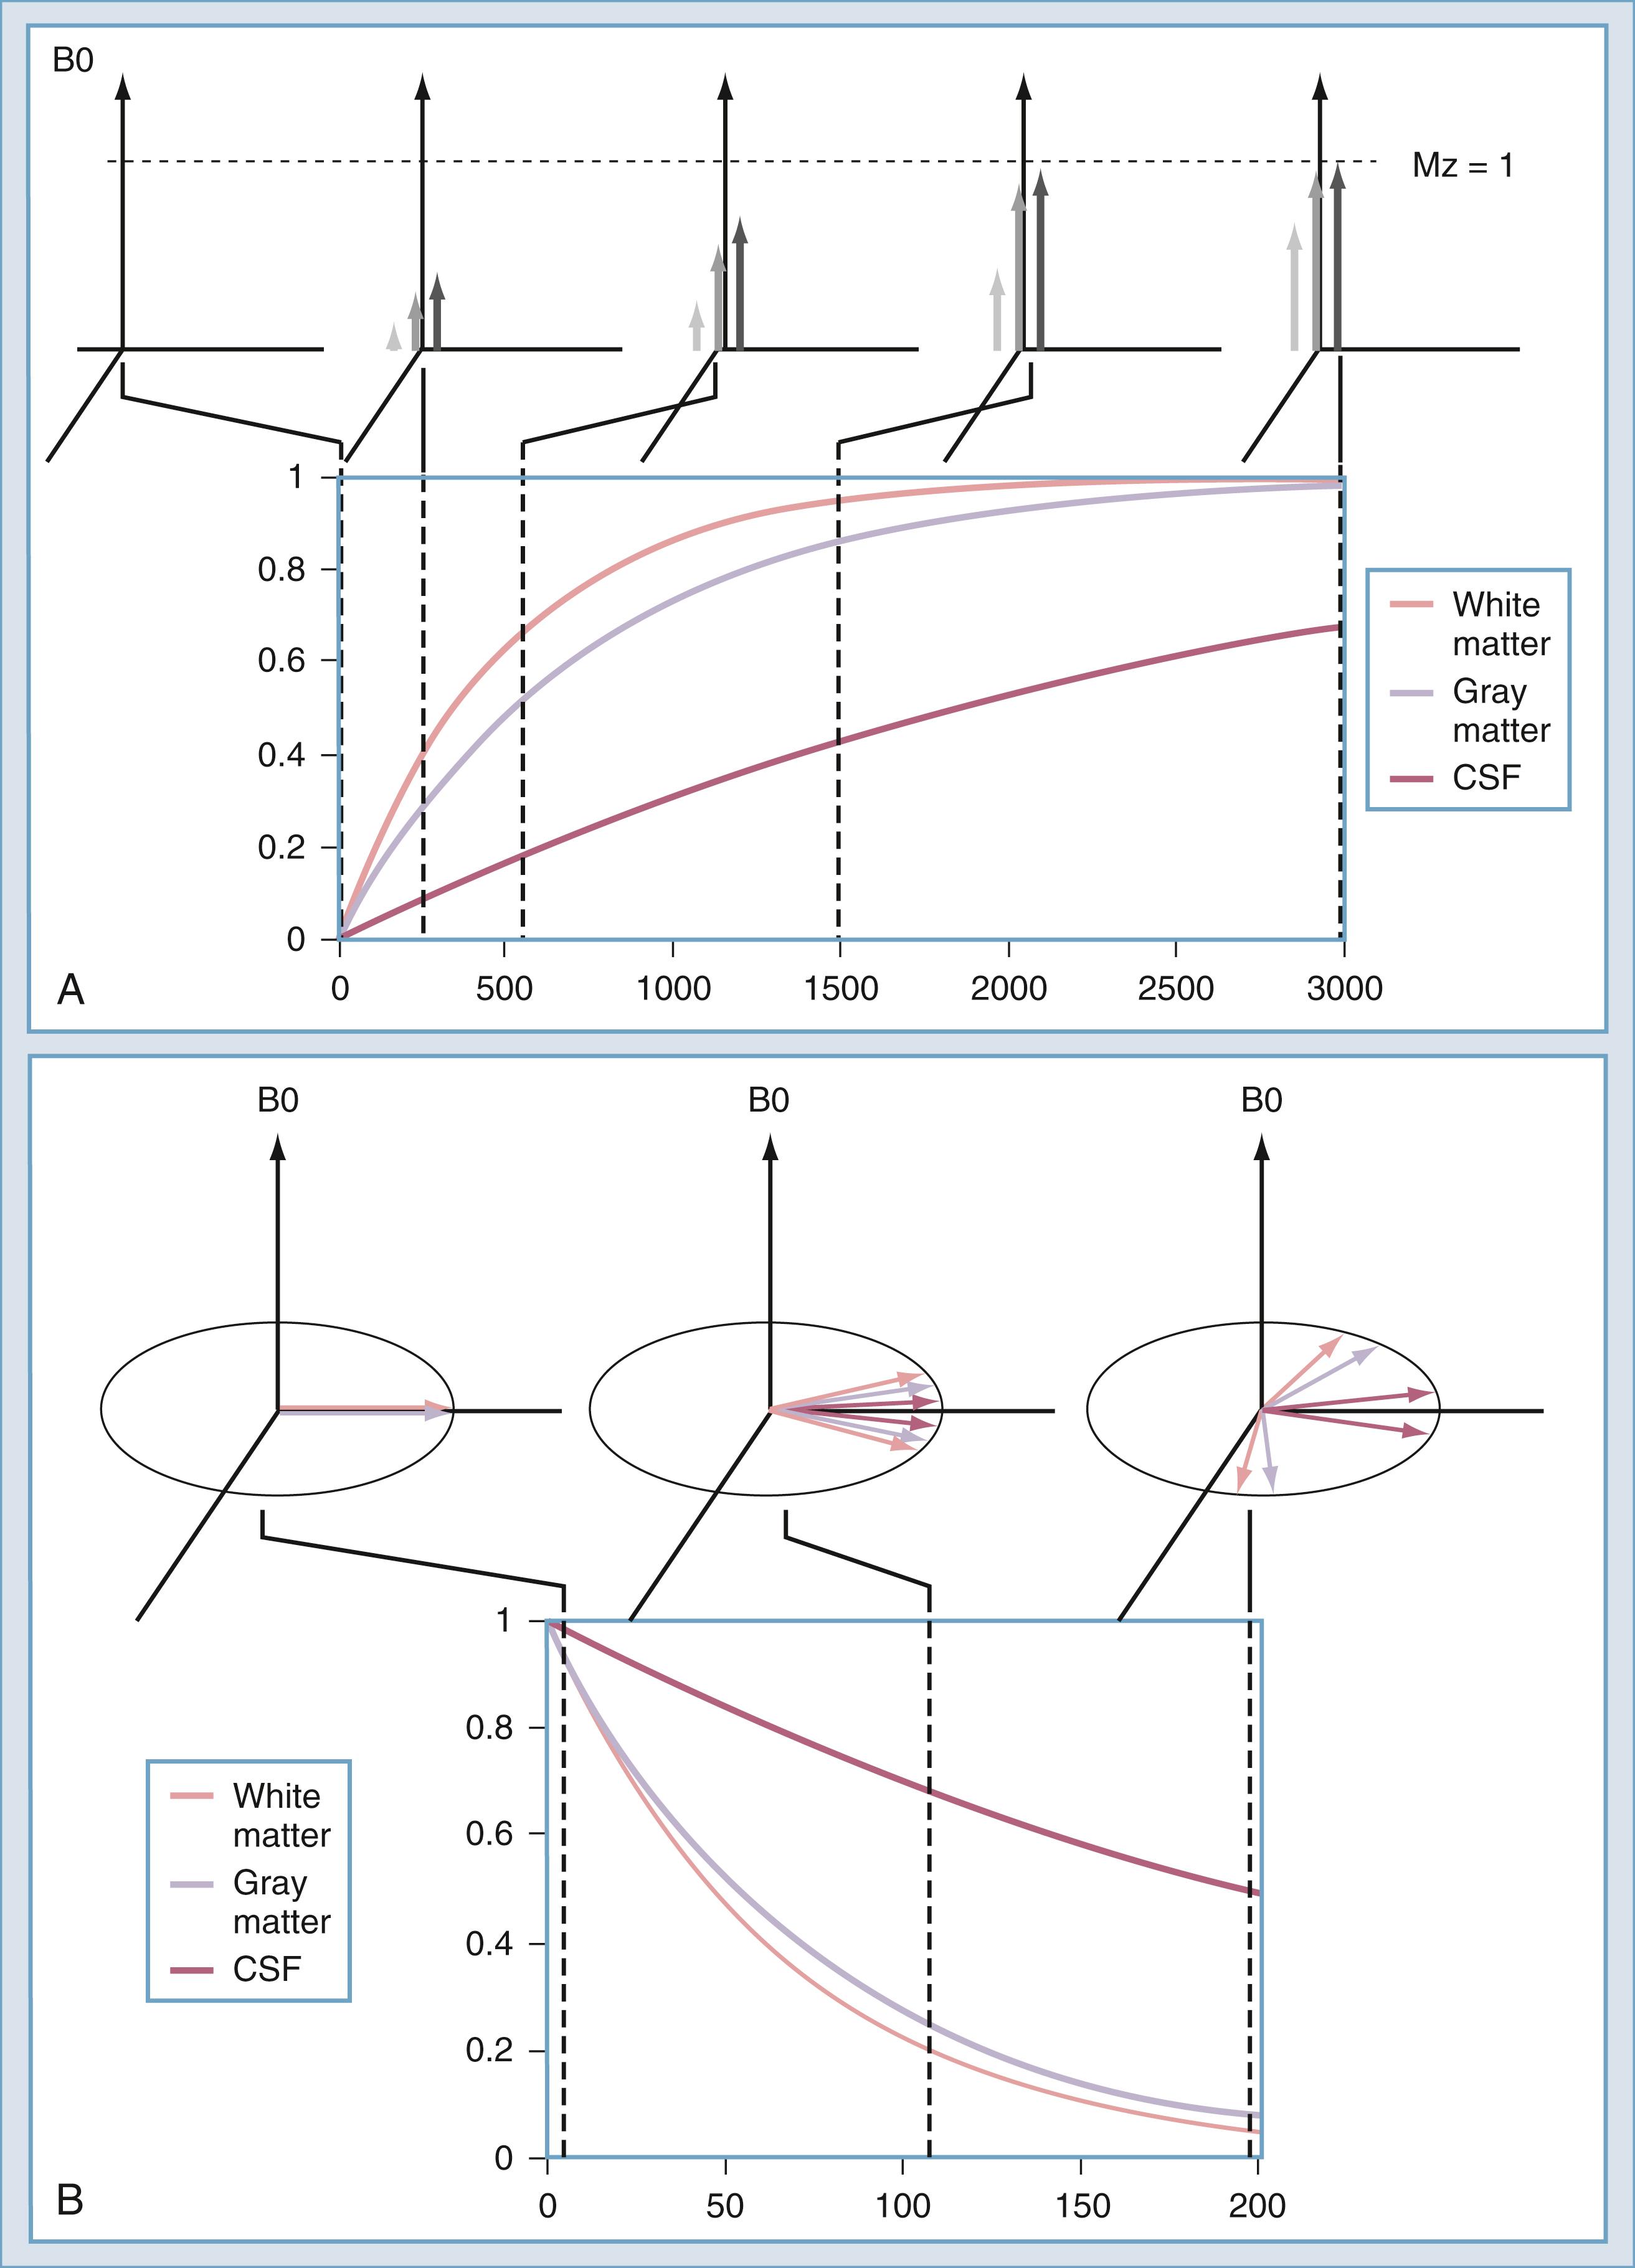 Figure 10.16, (A) Recovery of longitudinal magnetization (Mz) versus time for three substances with different T1 values. (B) Decay of Mx versus time for three substances with different T2 values. CSF, Cerebrospinal fluid.